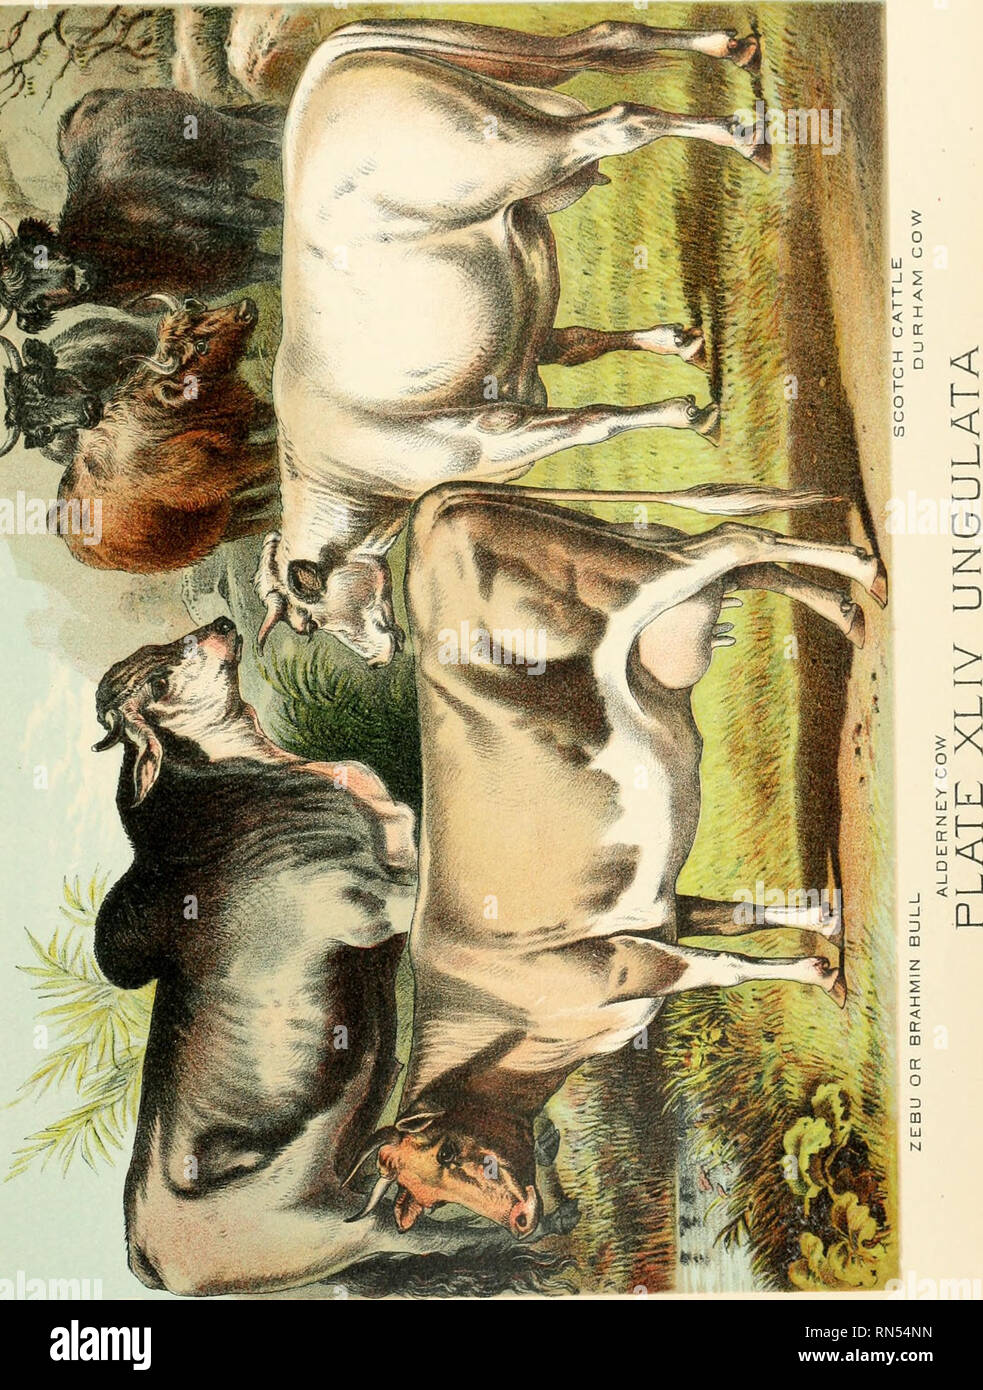 https://c8.alamy.com/comp/RN54NN/the-animal-kingdom-based-upon-the-writings-of-the-eminent-naturalists-audubon-wallace-brehm-wood-and-others-mammals-please-note-that-these-images-are-extracted-from-scanned-page-images-that-may-have-been-digitally-enhanced-for-readability-coloration-and-appearance-of-these-illustrations-may-not-perfectly-resemble-the-original-work-craig-hugh-new-york-johnson-amp-bailey-RN54NN.jpg